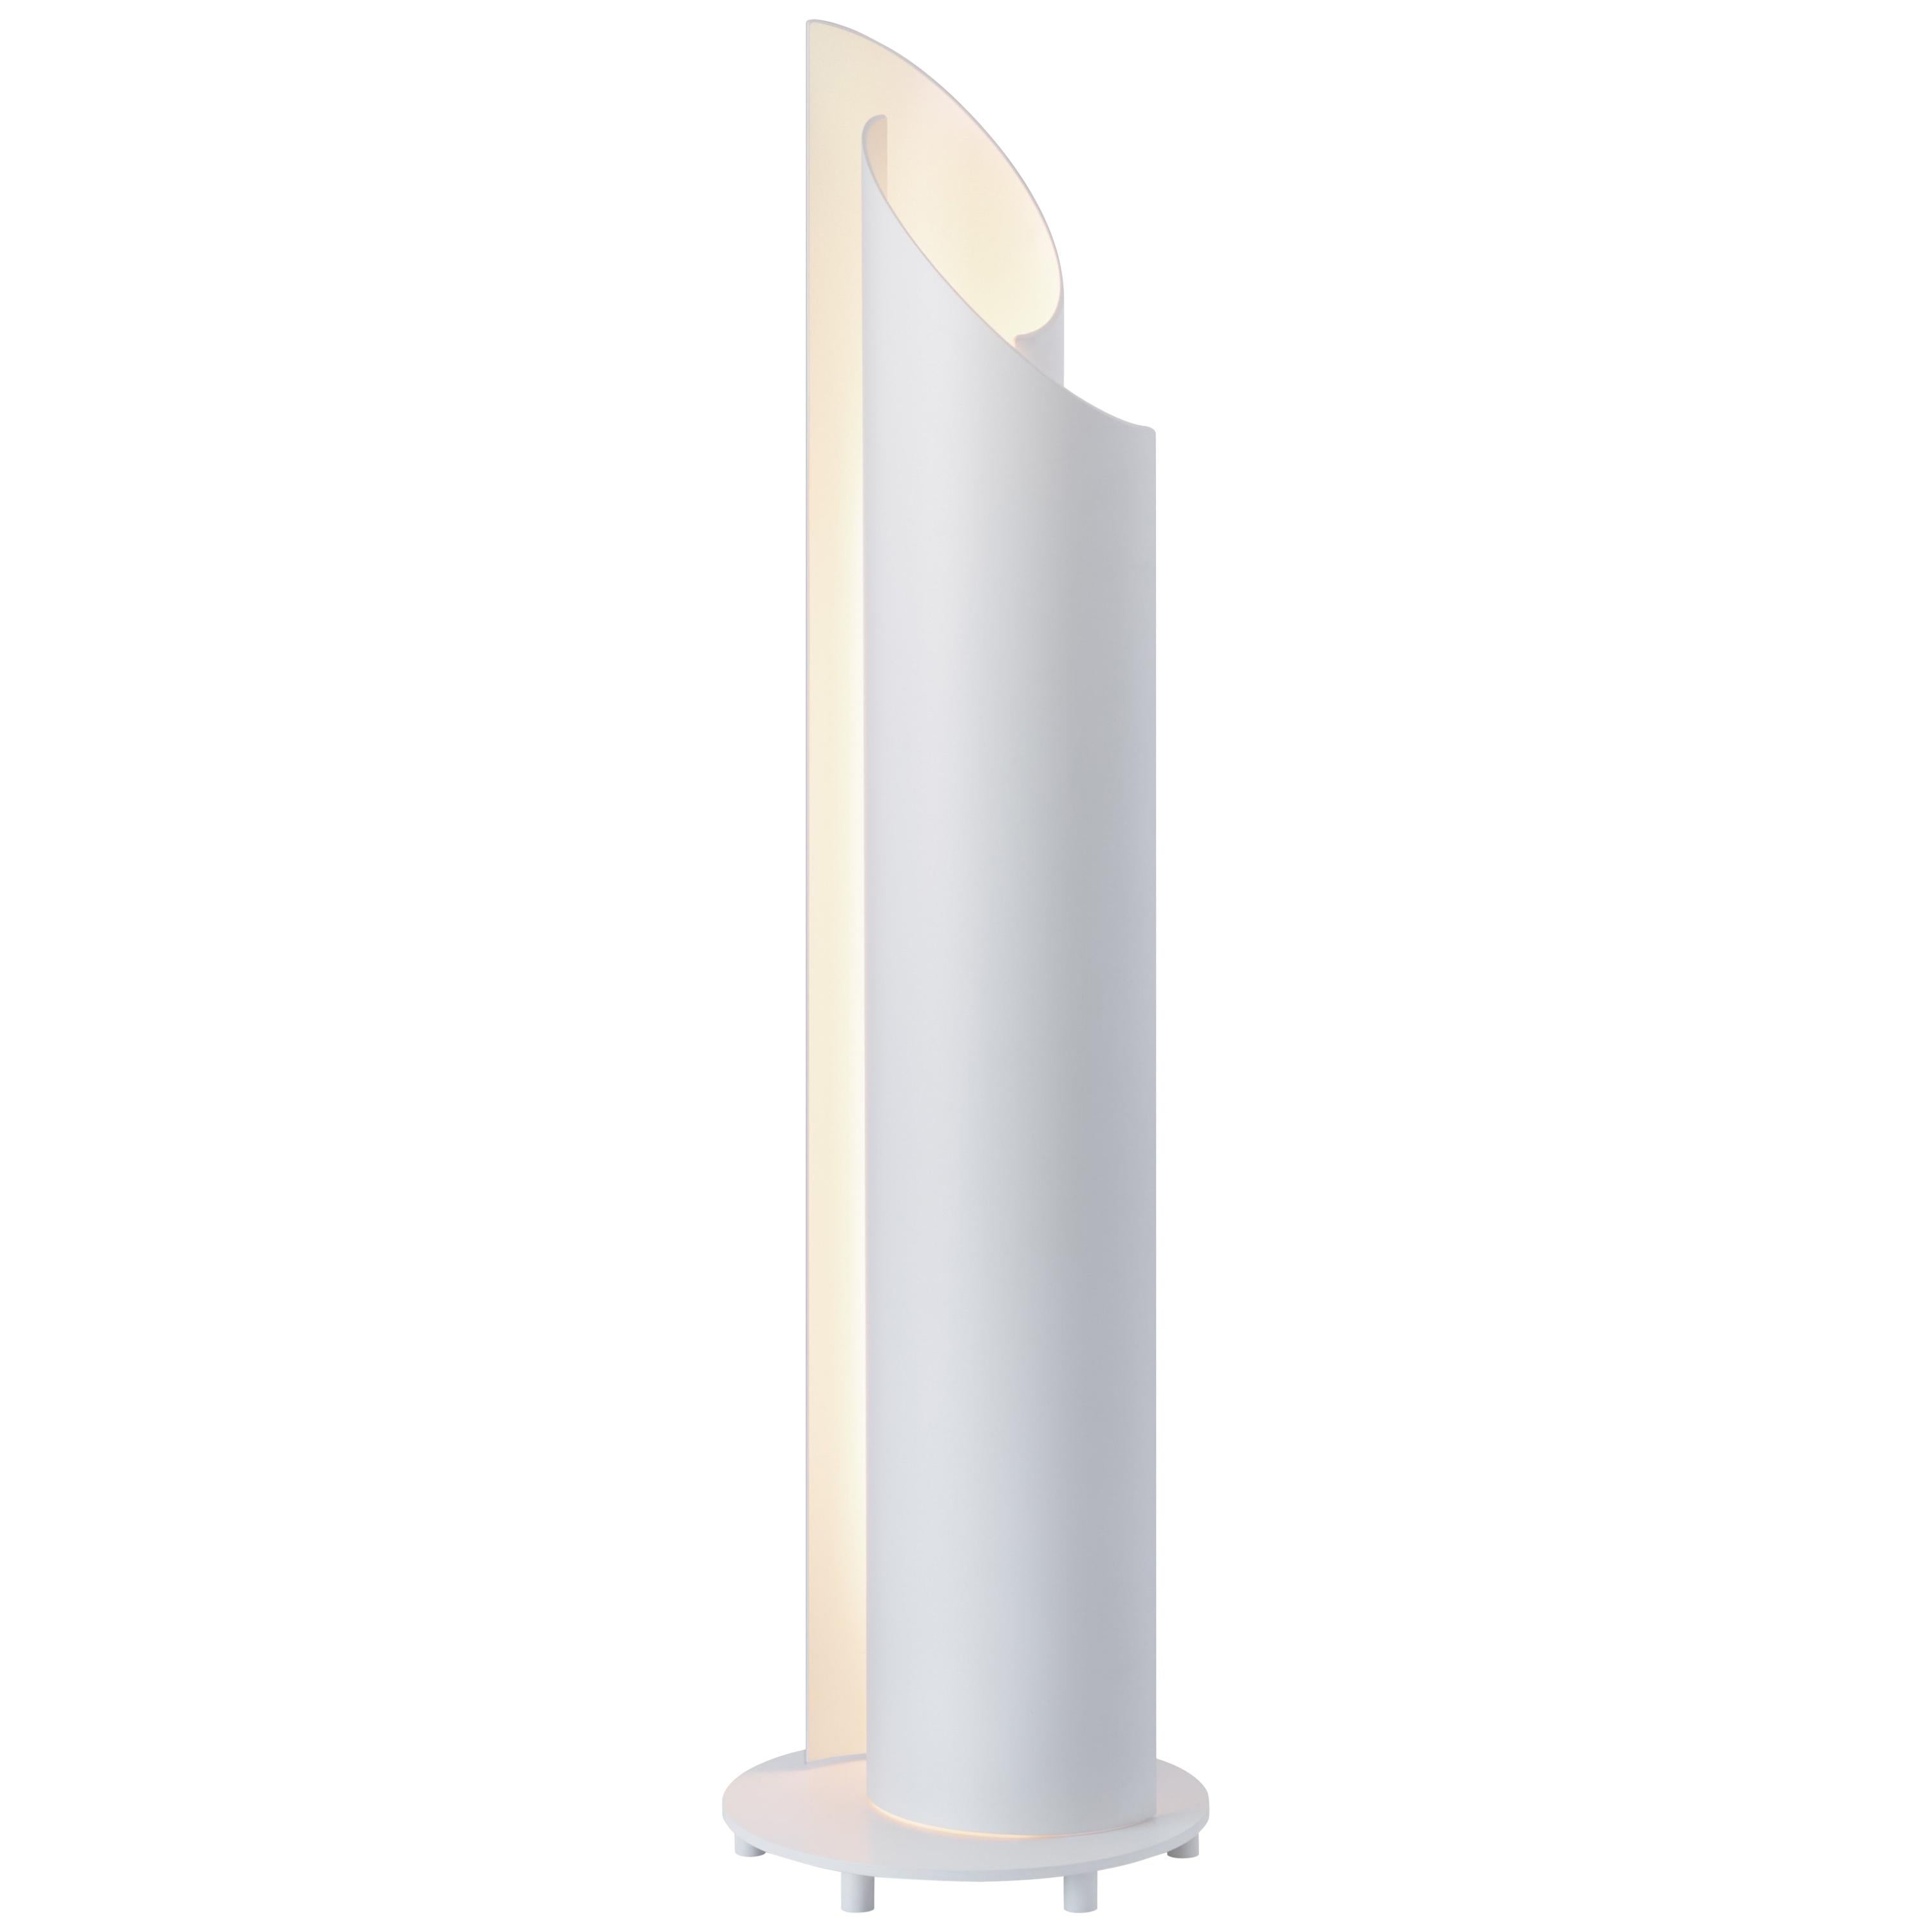 Vella Table Lamp in White by Pablo Designs